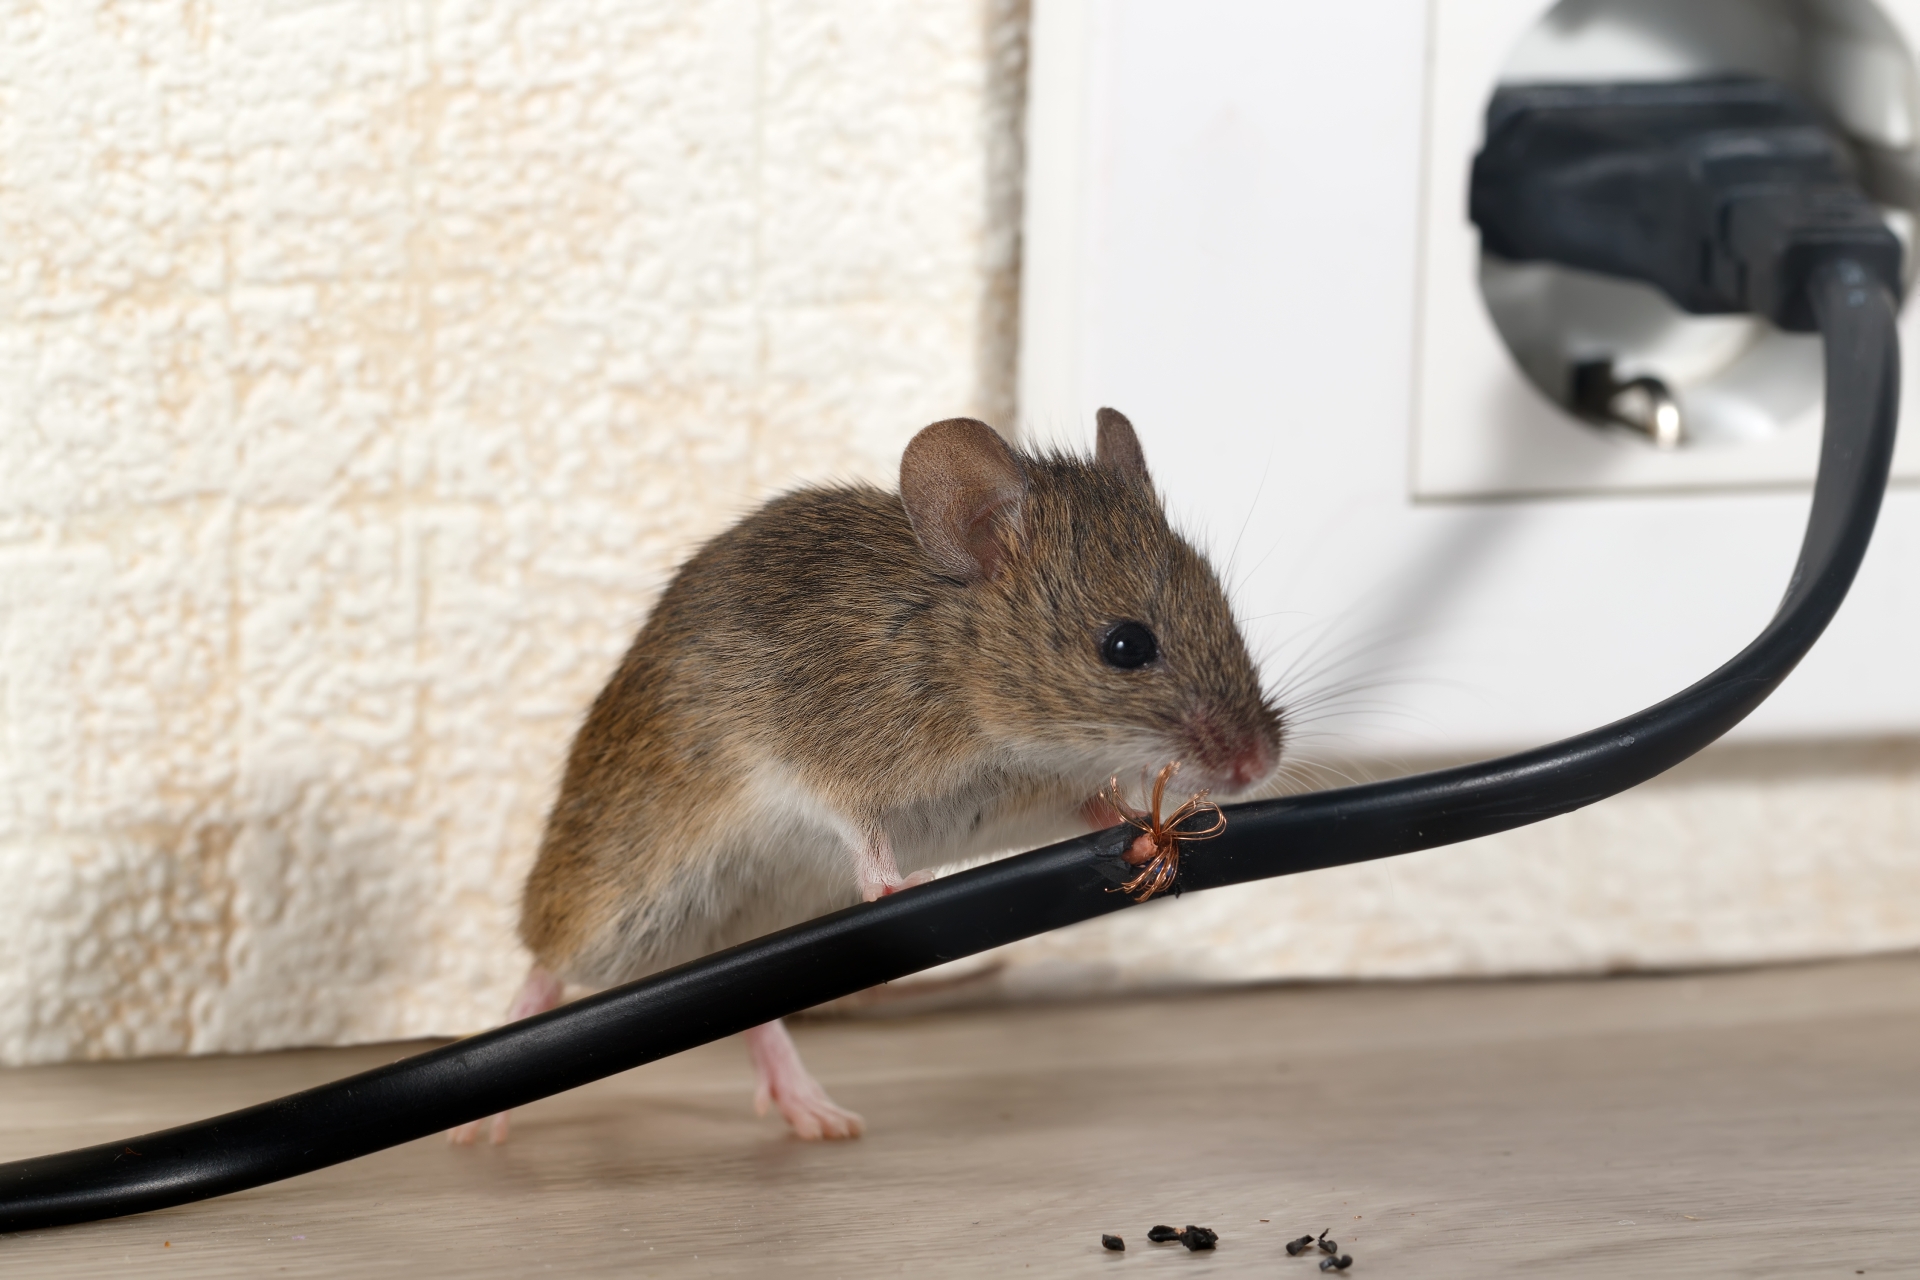 Mice Infestation, Pest Control in Grove Park, SE12. Call Now 020 8166 9746